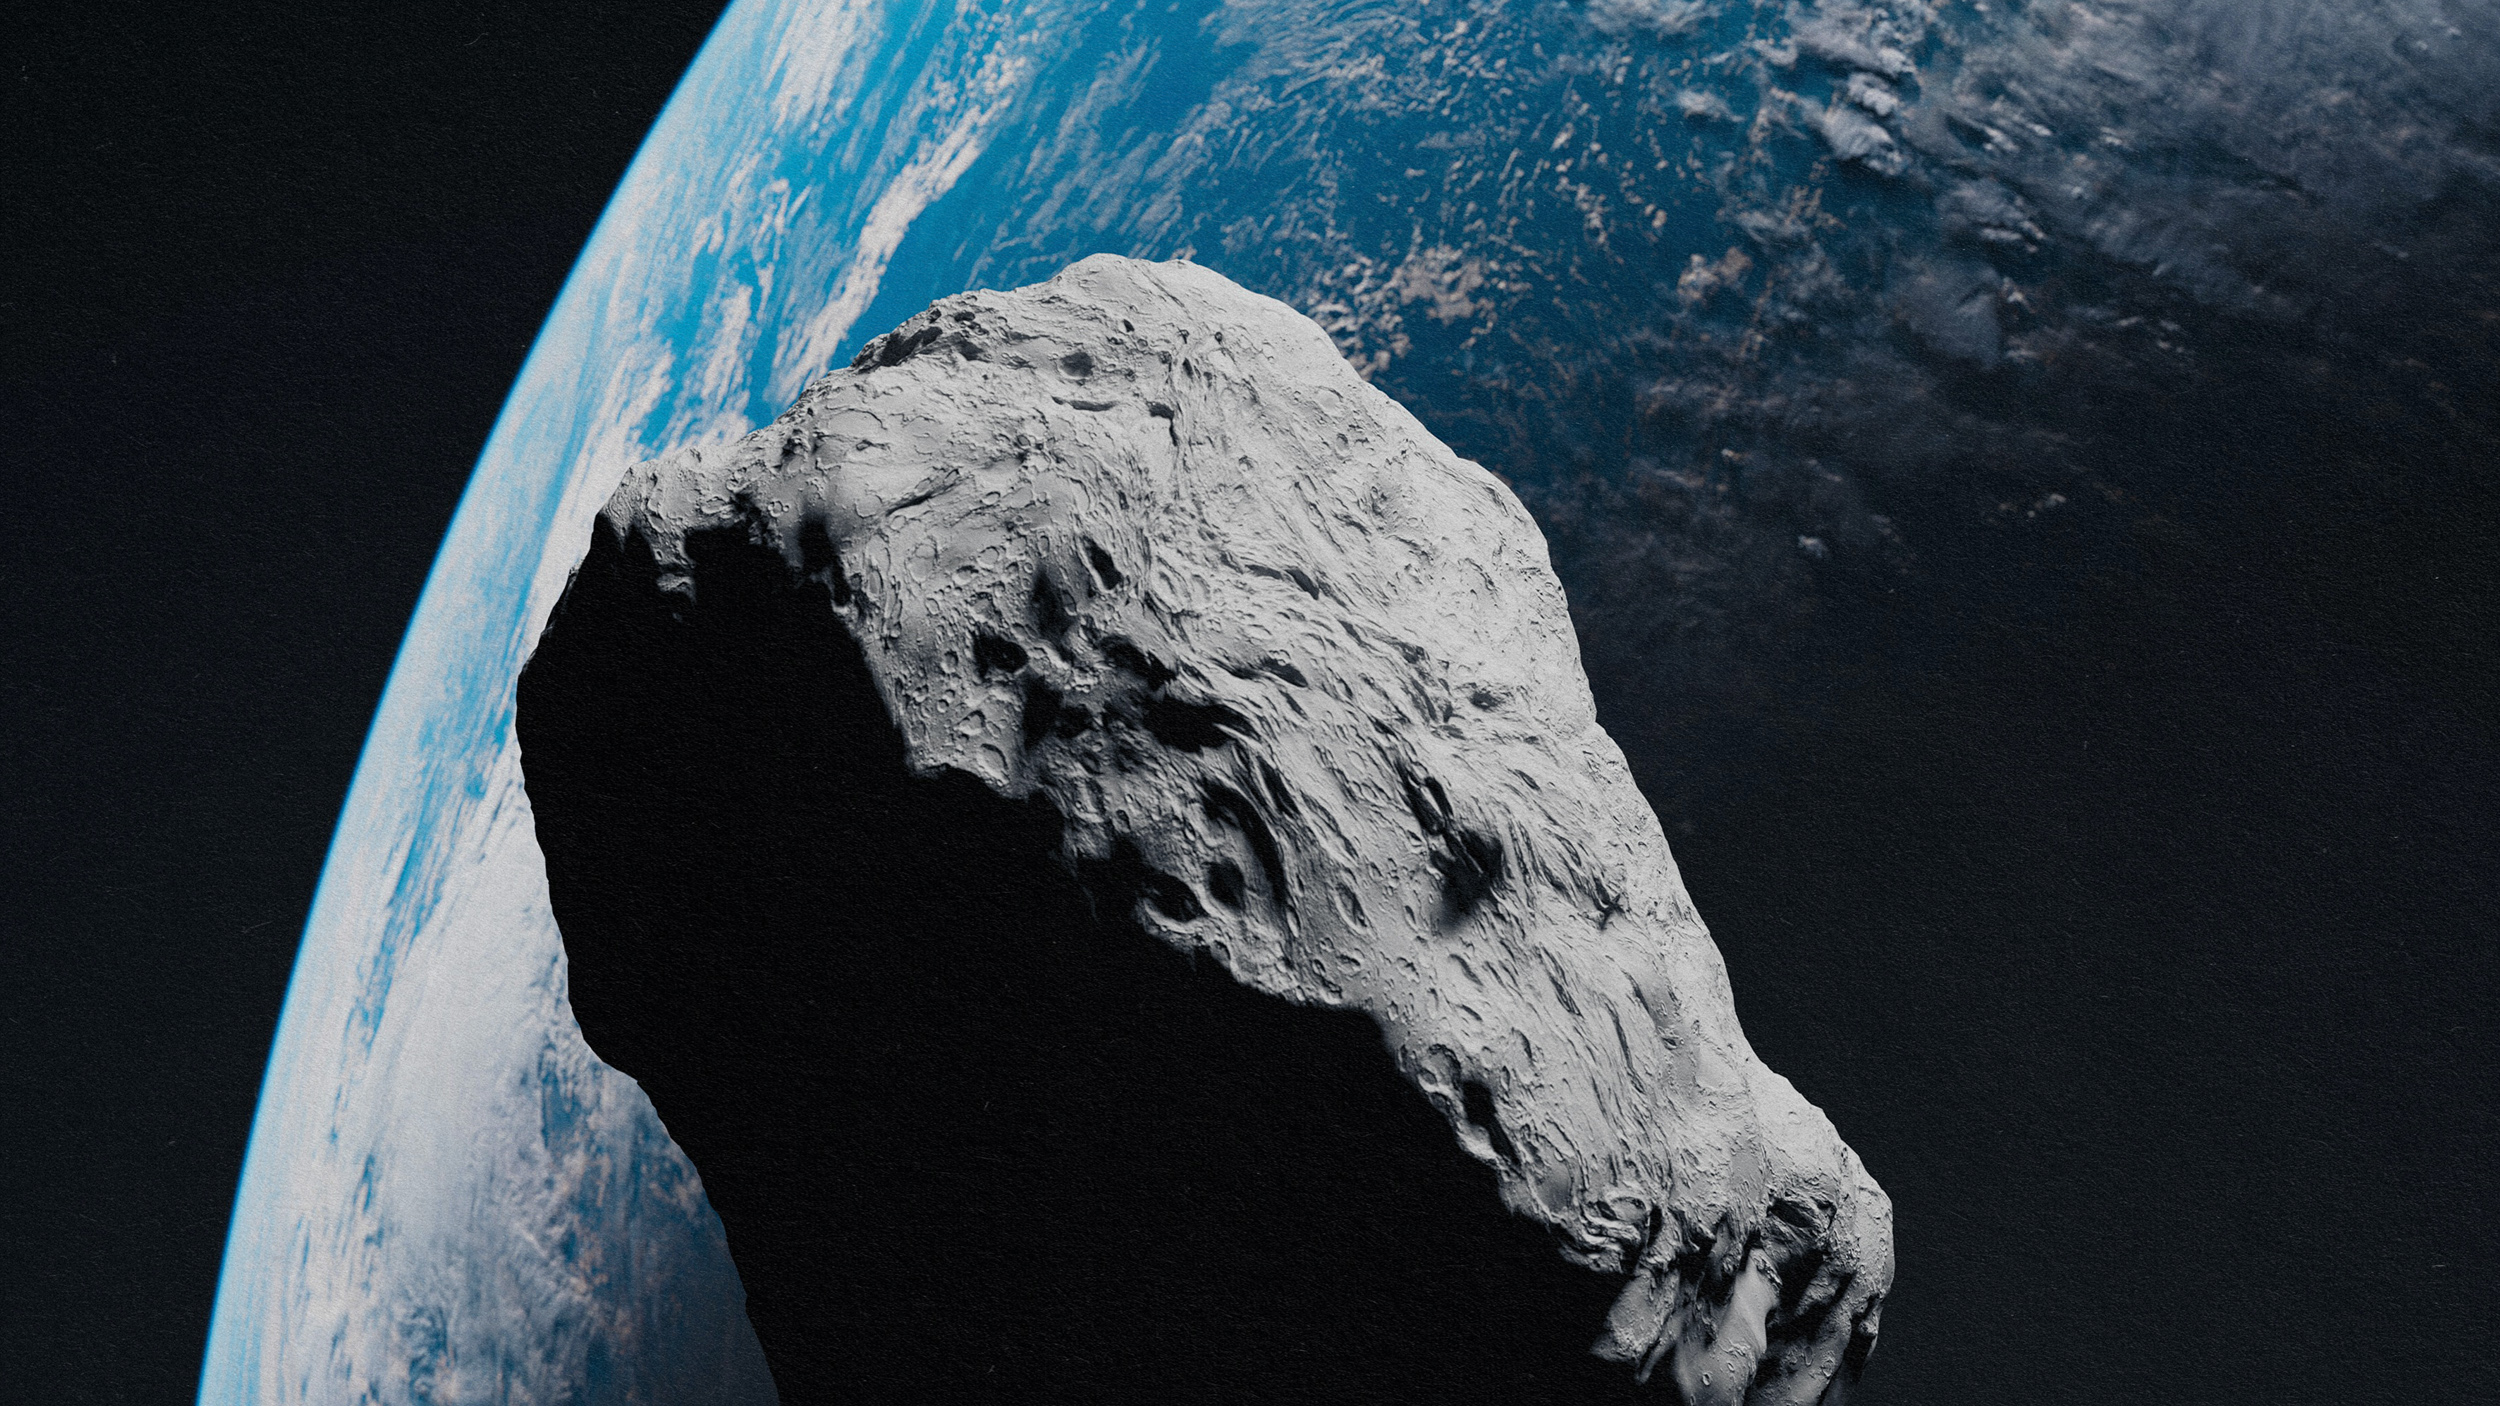 An artist's impression of an asteroid approaching the earth.